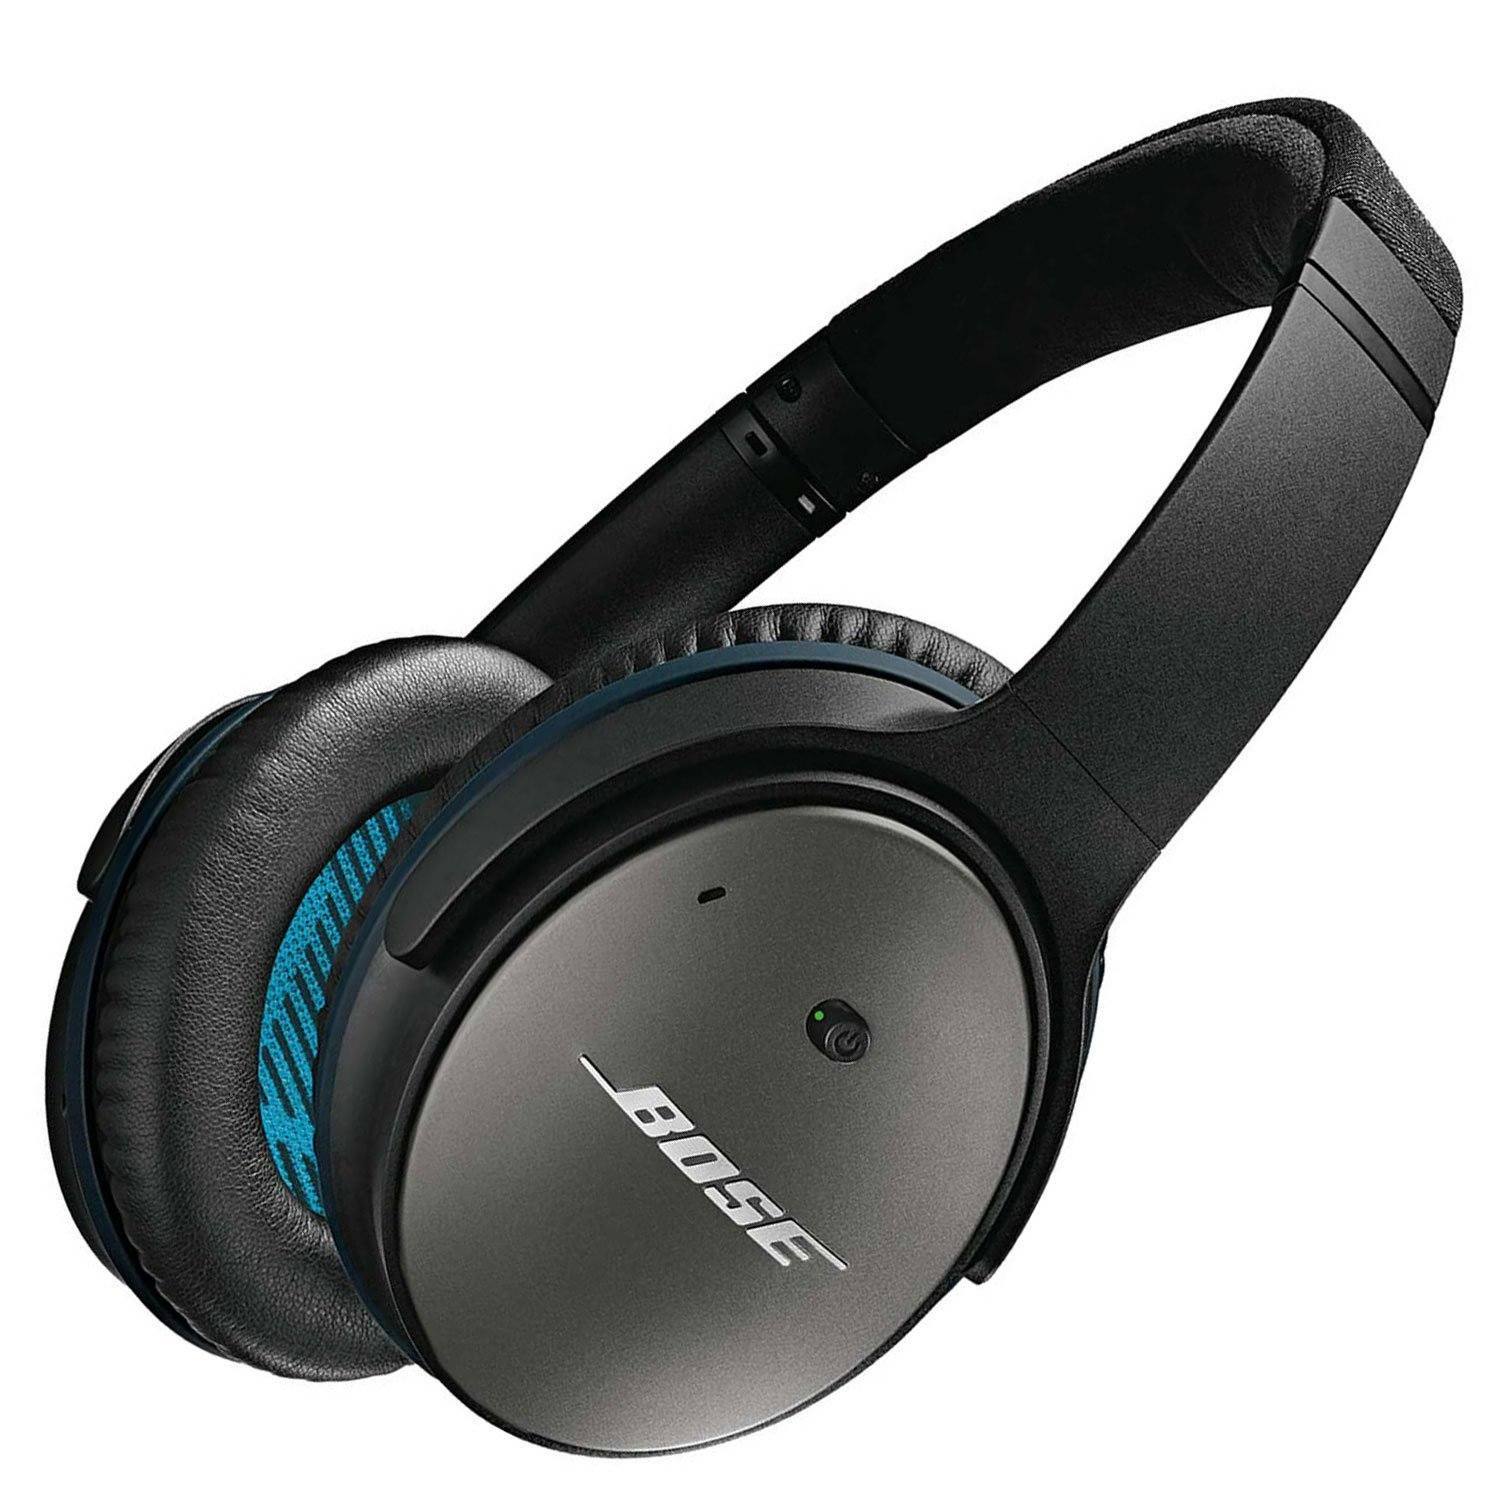 Bose QuietComfort 25 Review - Is the BEST Noise Cancelling Headphone?